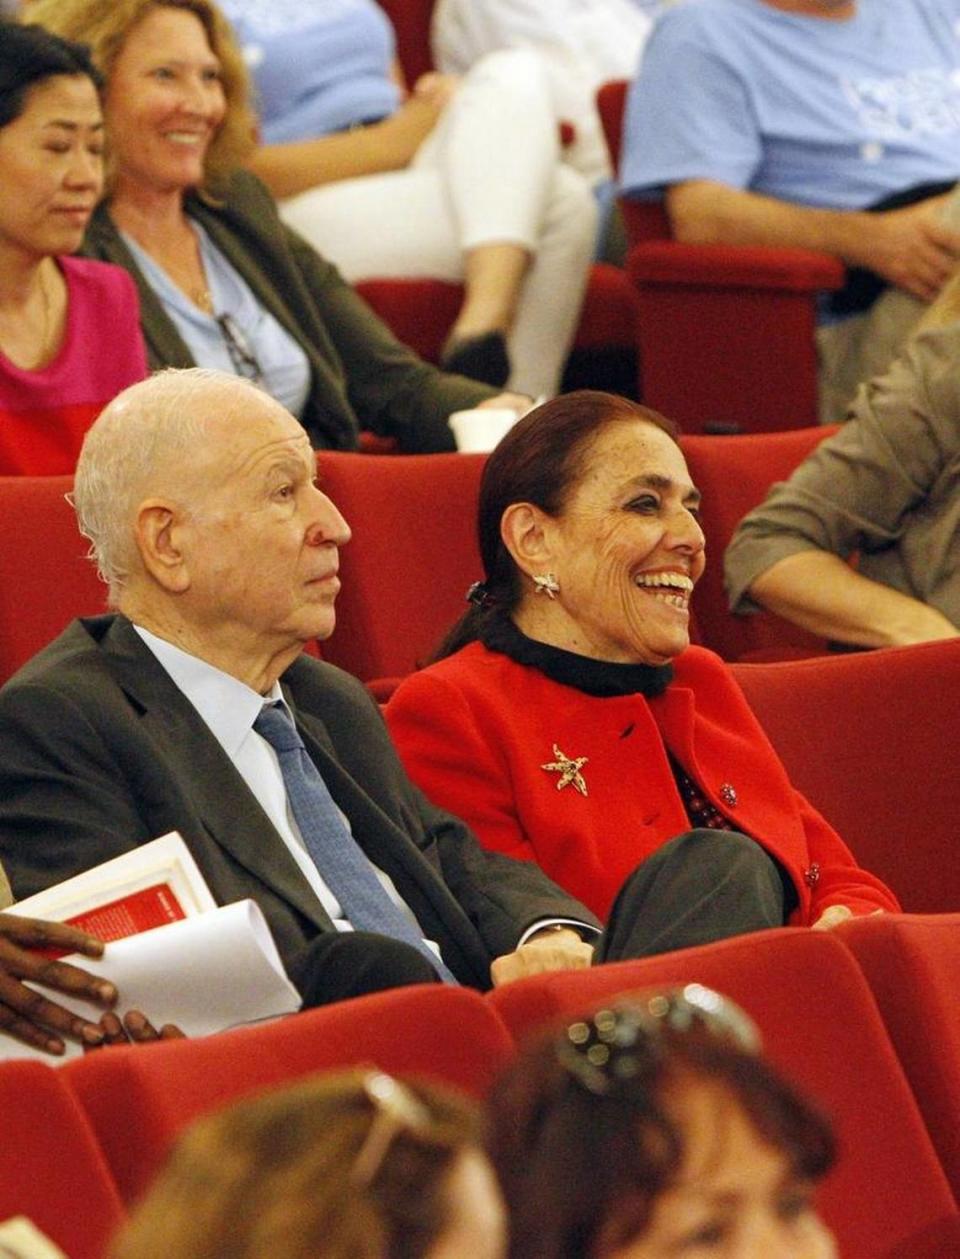 Patricia Frost, seated next to her husband, Dr. Phillip Frost, is one of 15 people who will be on the FIU search committee to hire a new president.